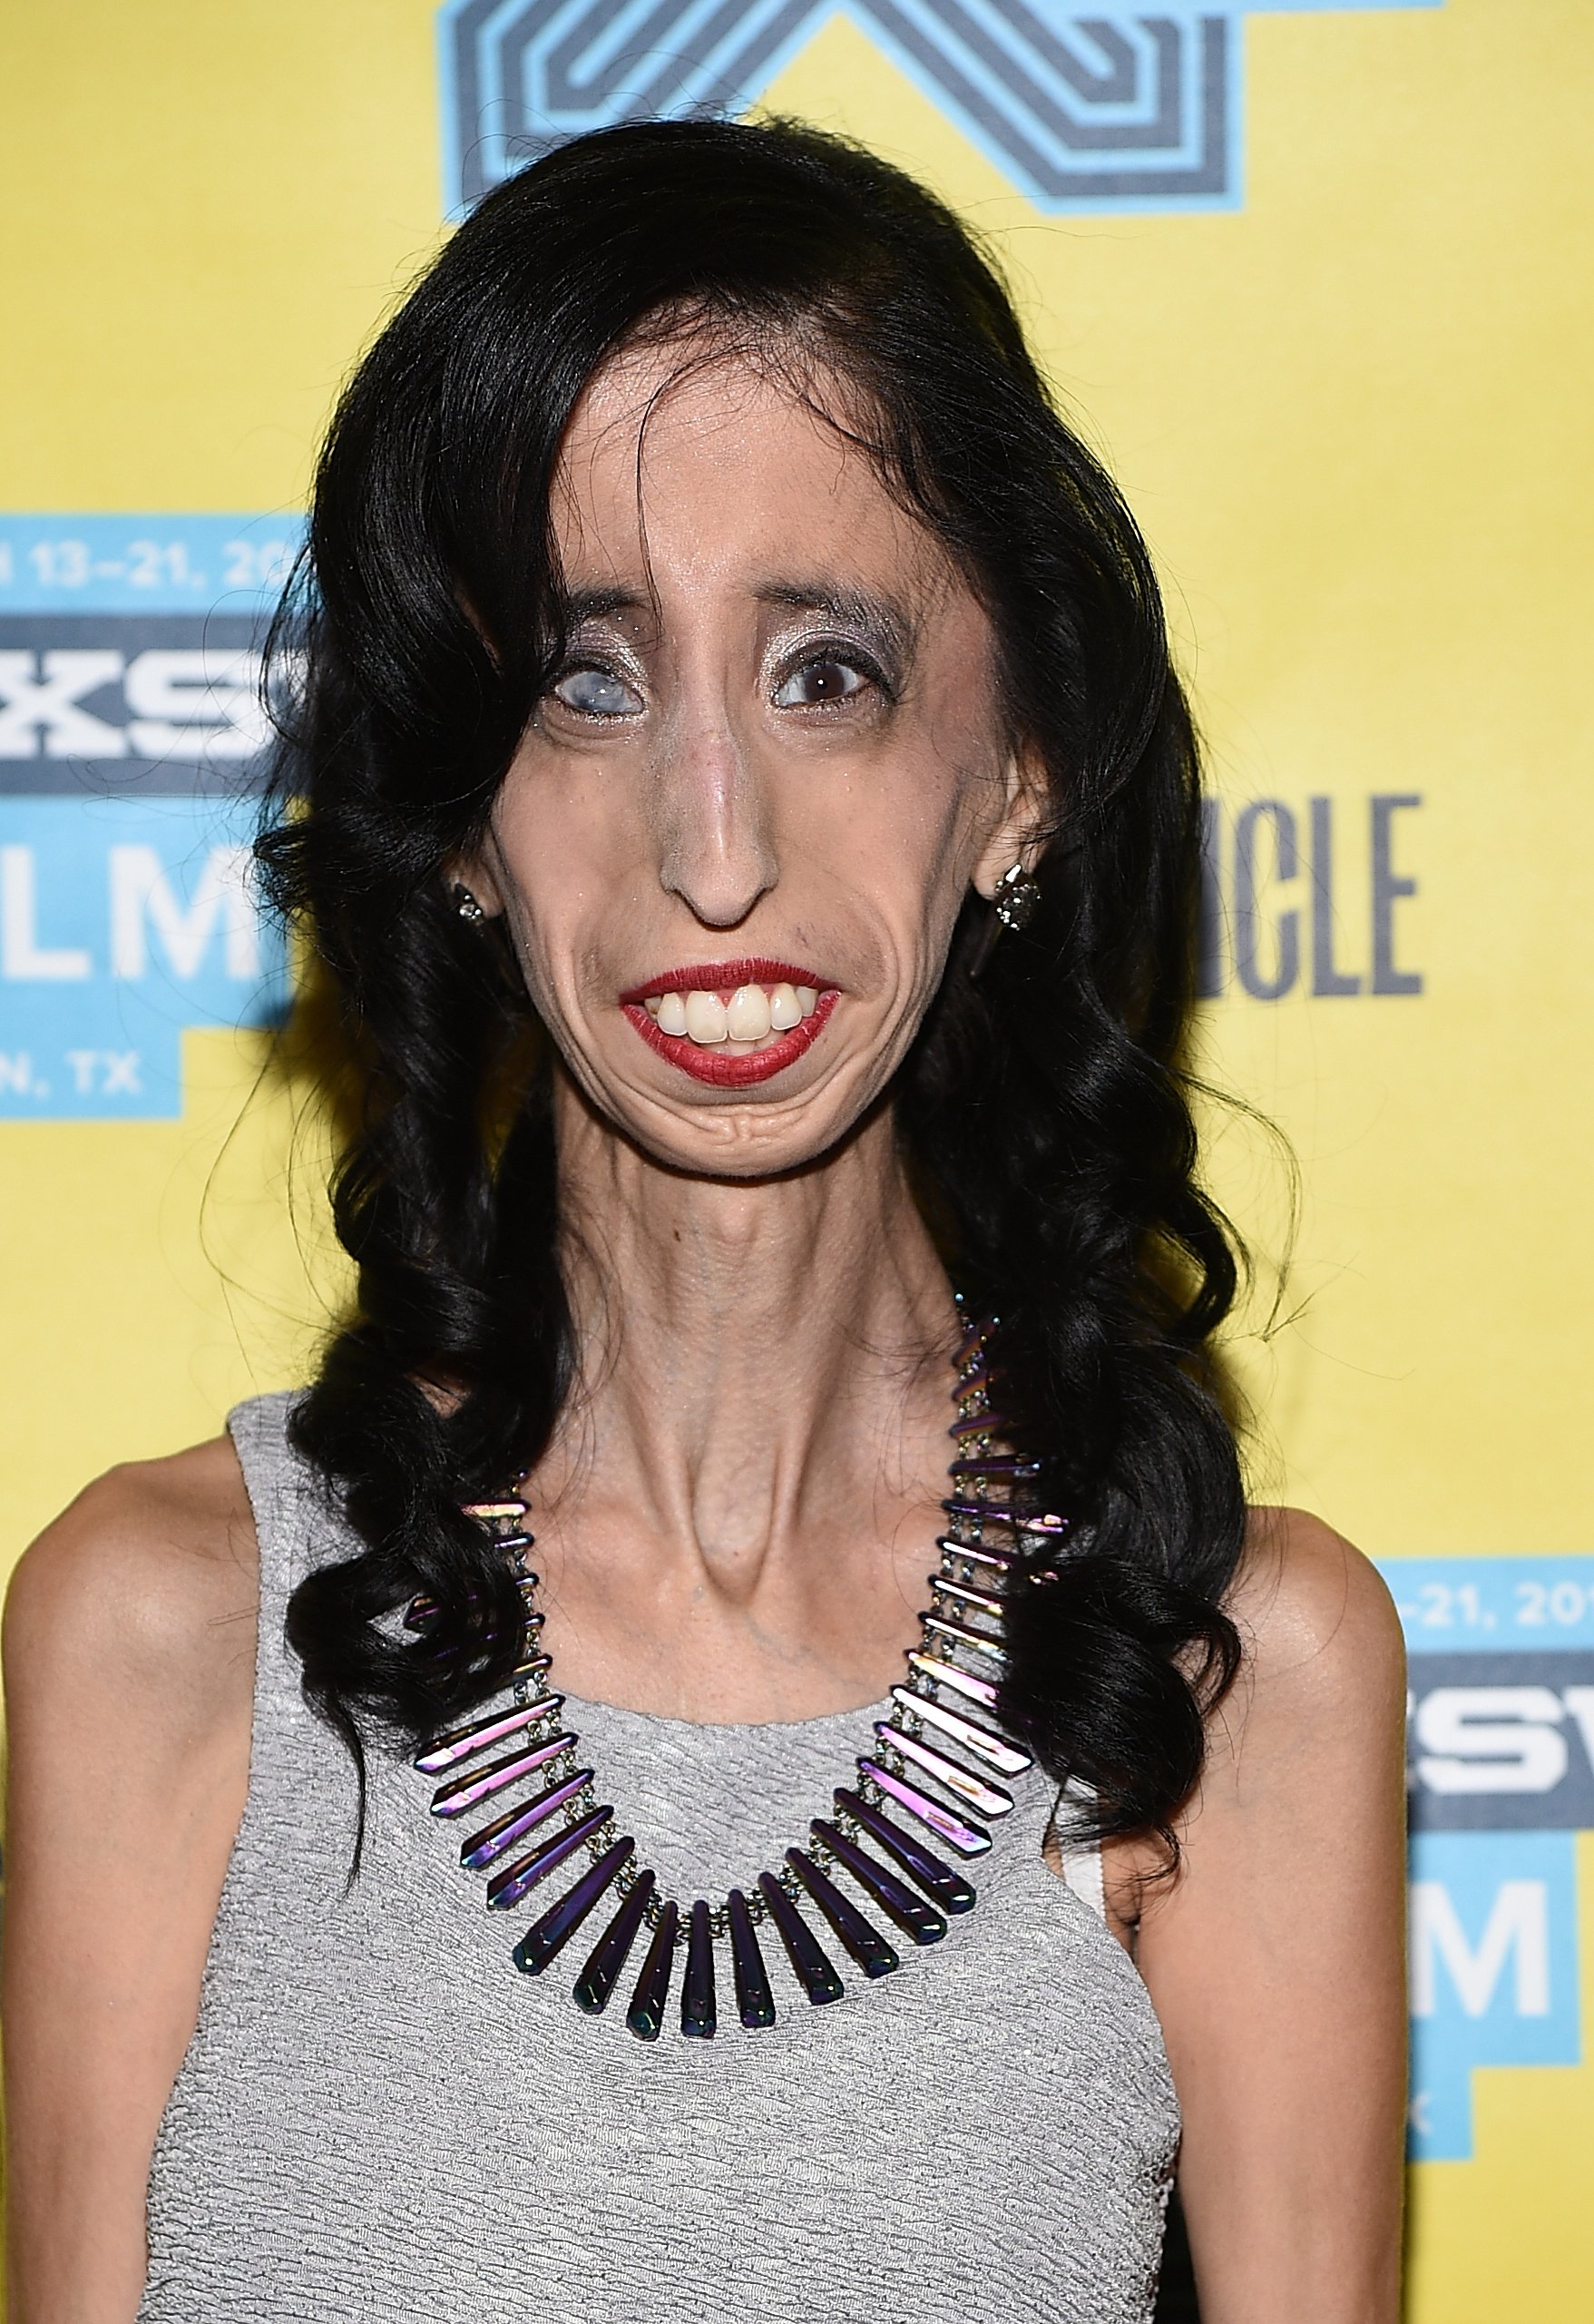 Lizzie Velasquez arrives at the premiere of "A Brave Heart: The Lizzie Velasquez Story" at Paramount Theatre on March 14, 2015 in Austin.